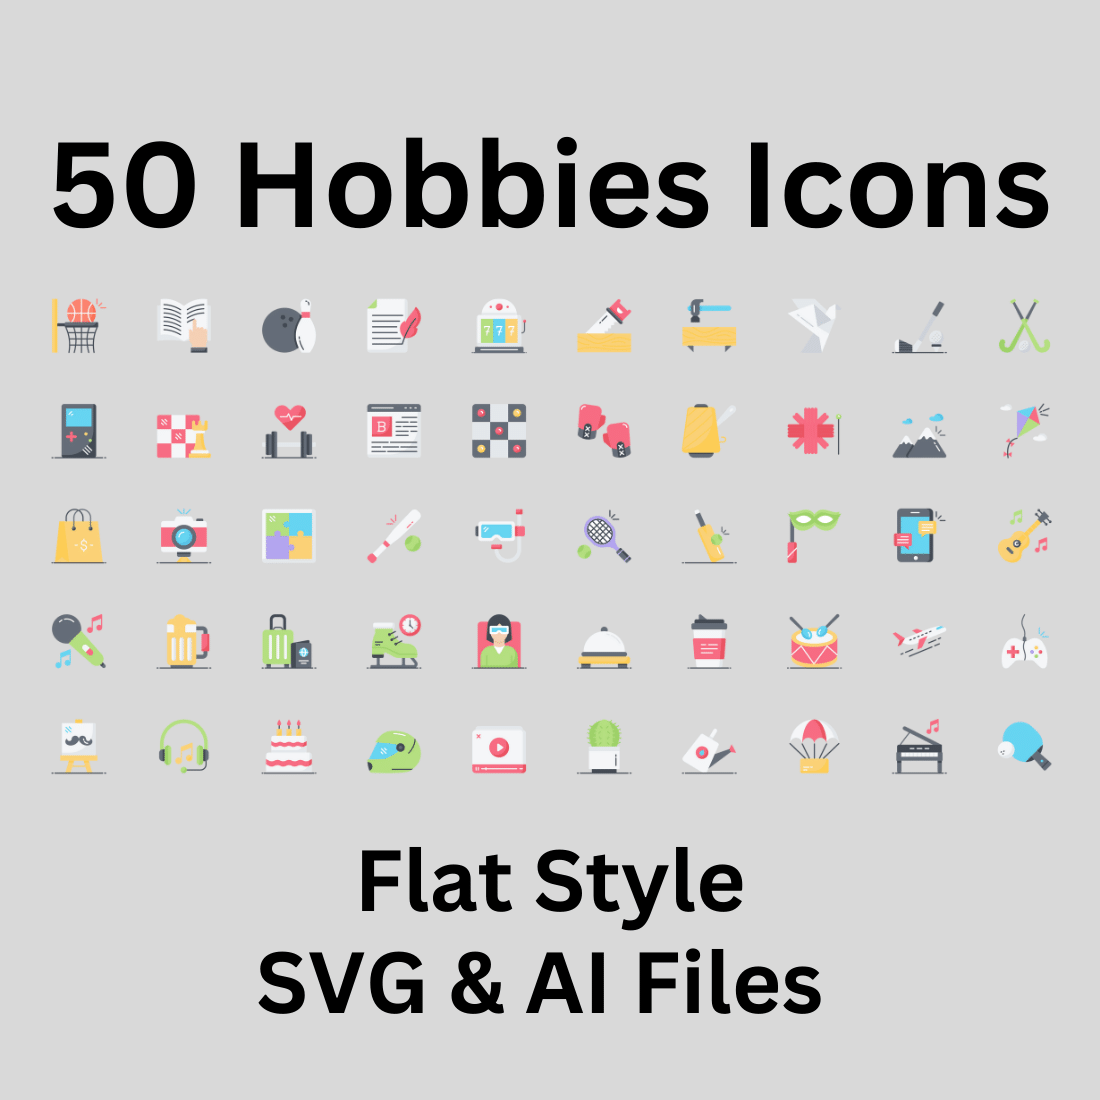 Hobbies Icon Set 50 Flat Icons - SVG And AI Files preview image.